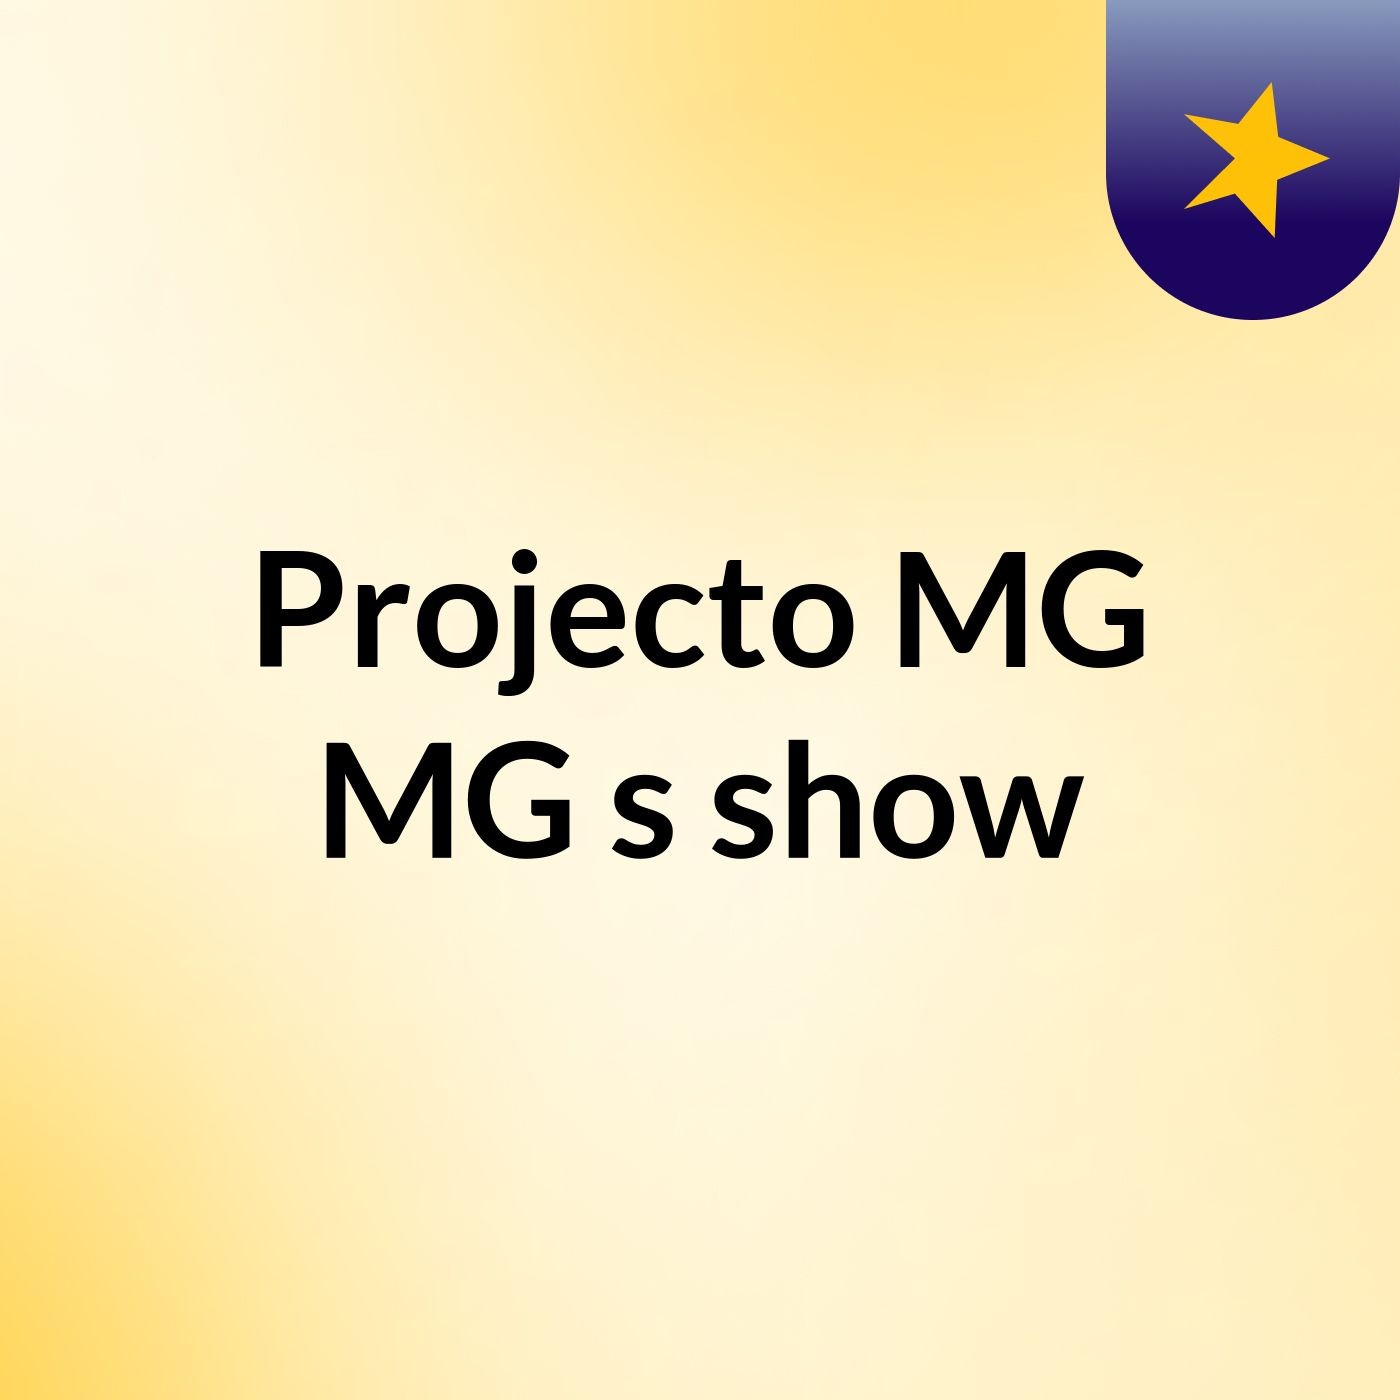 Projecto MG MG's show